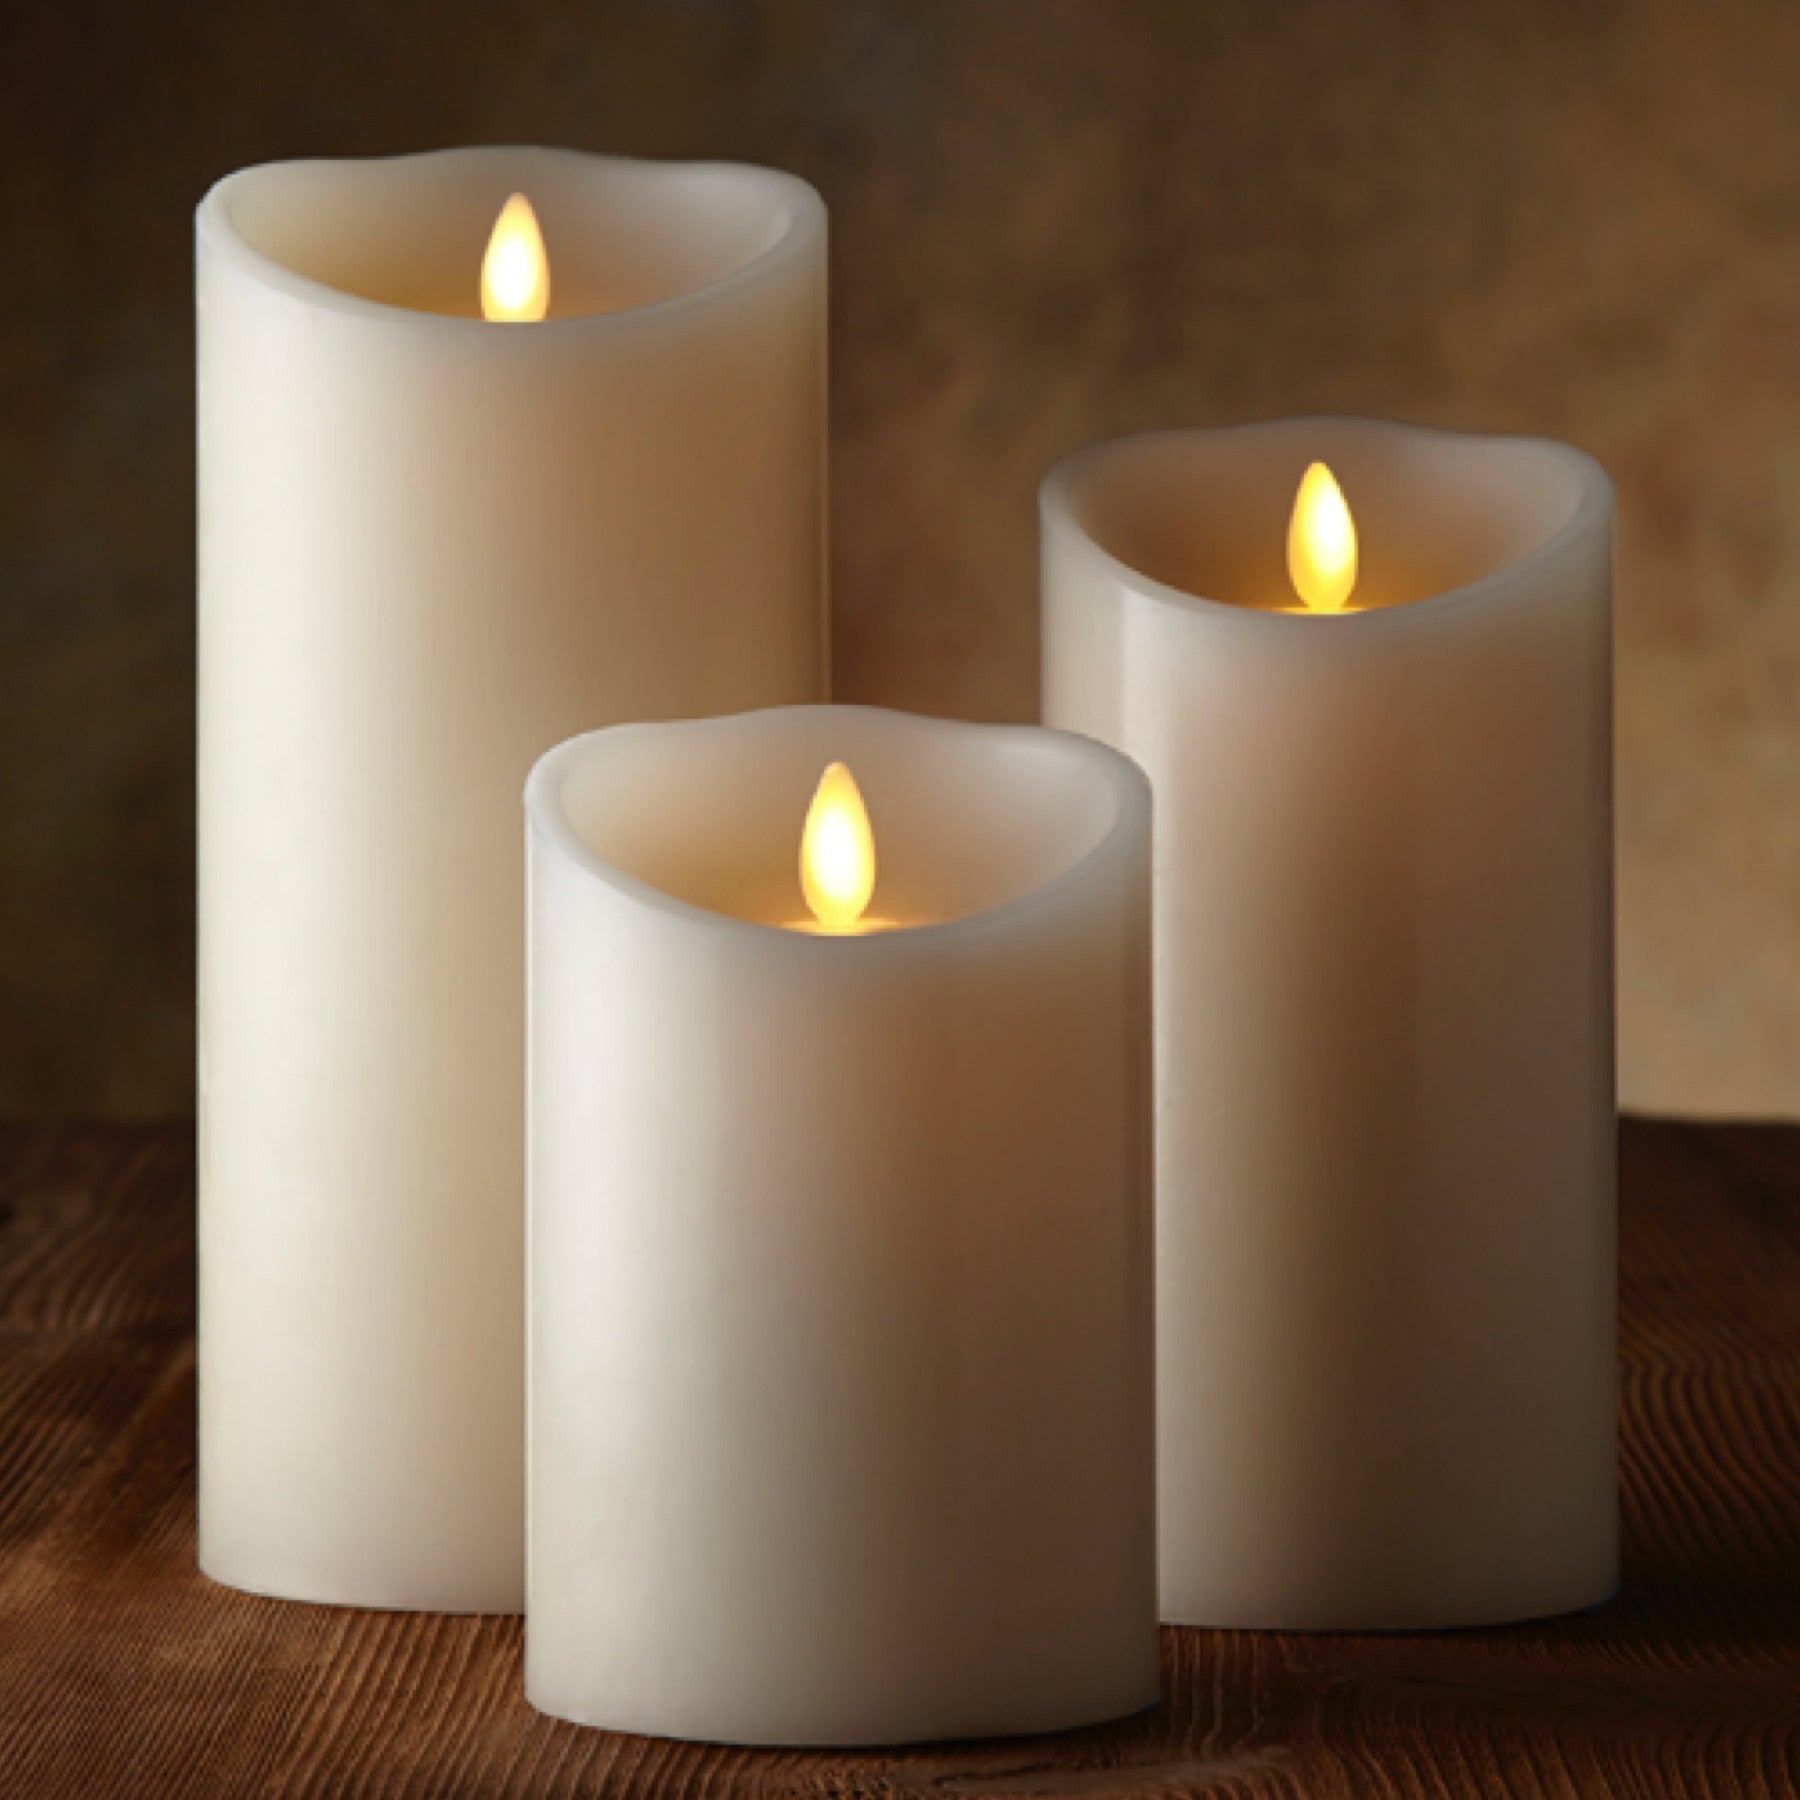 TR95002 Premium Real Flame Effect Set Of 3 Candles With